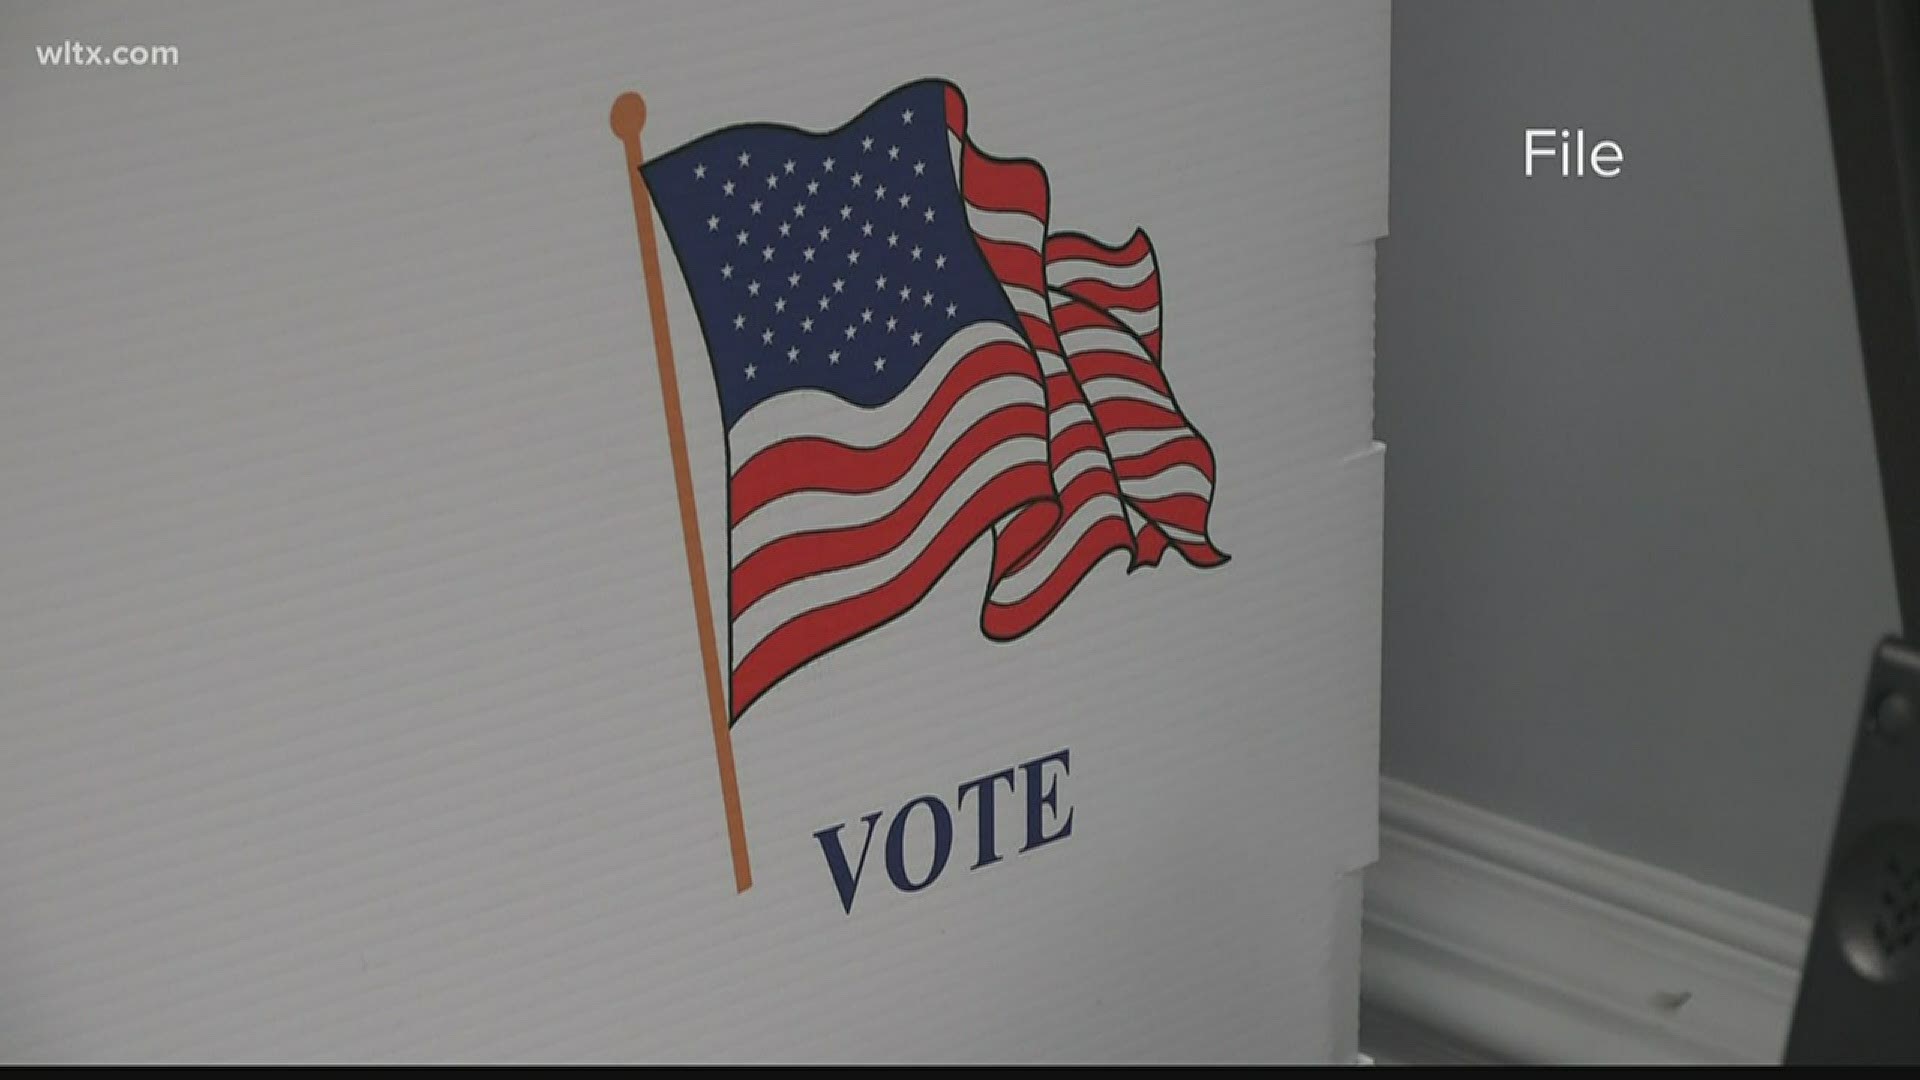 SC Primary election is on June 9, 2020